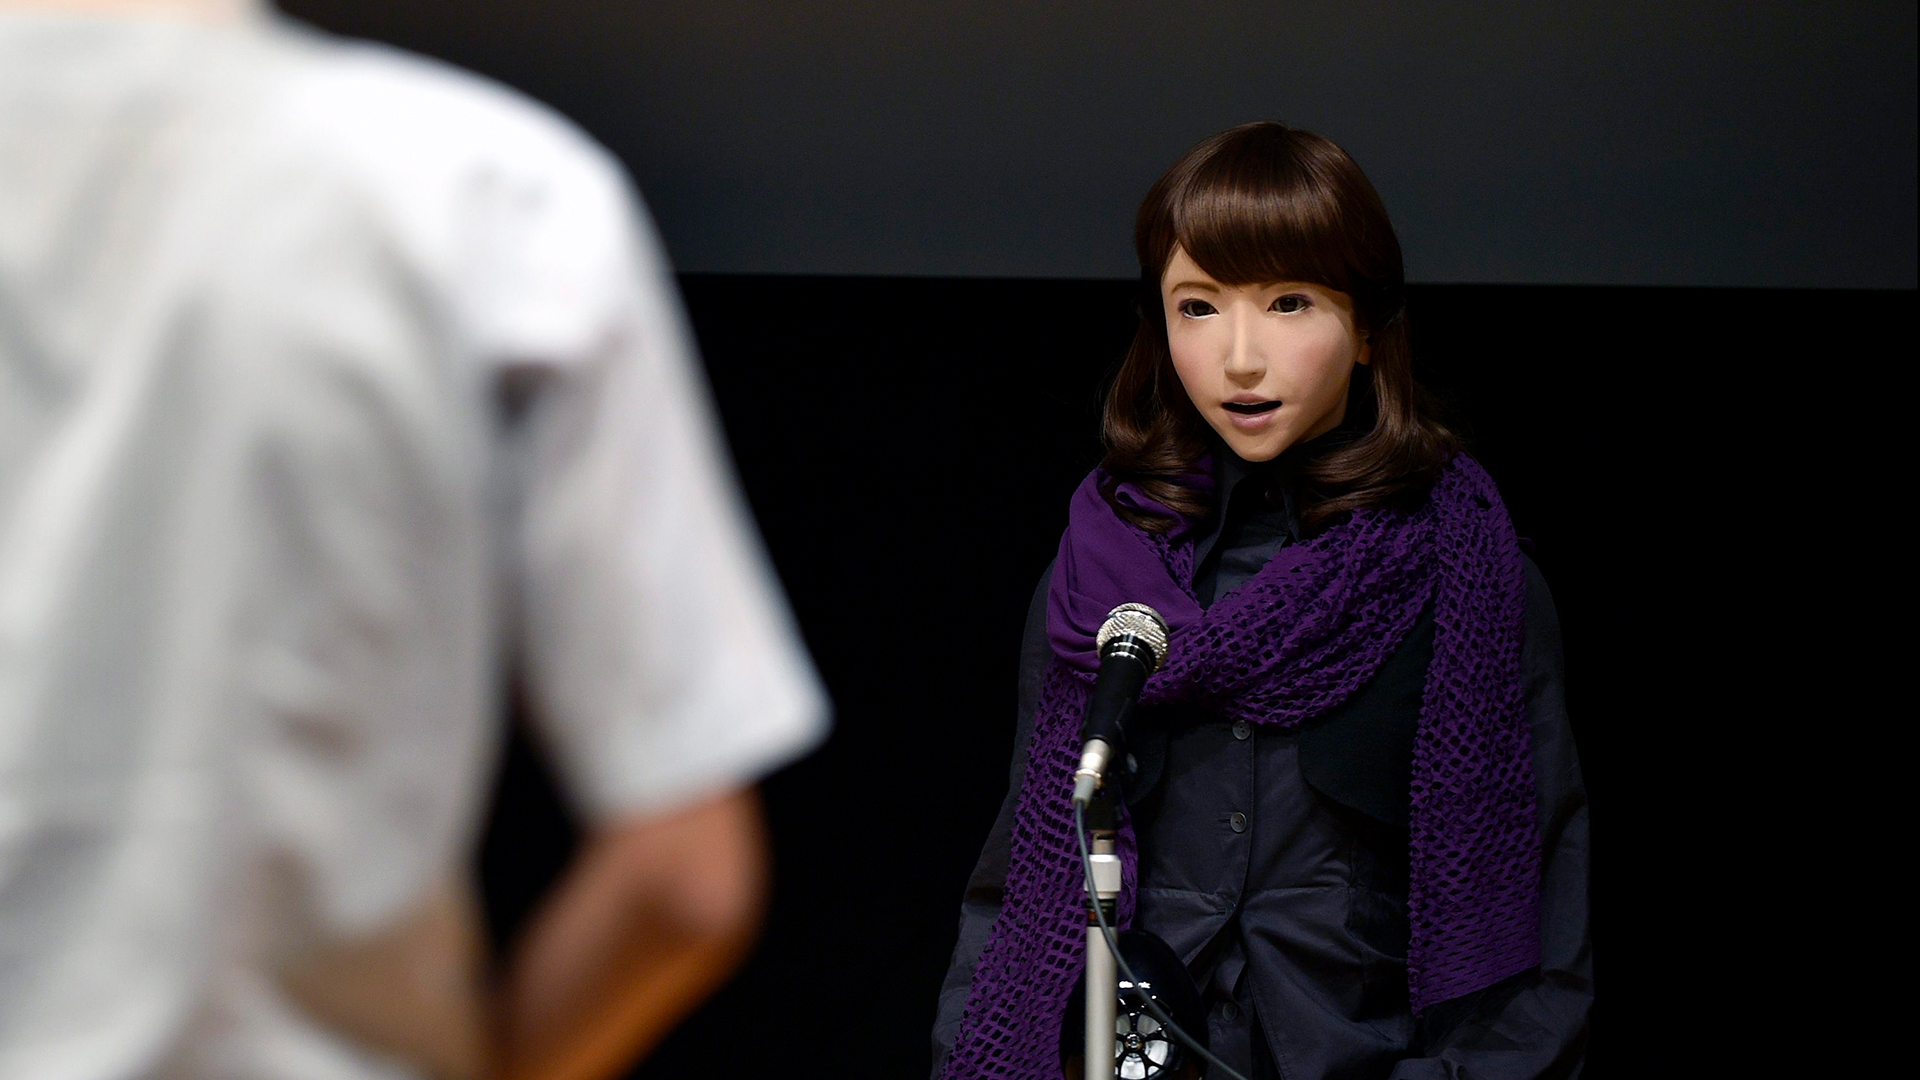 Japan’s sympathetic robot: Erica, the laughing robot